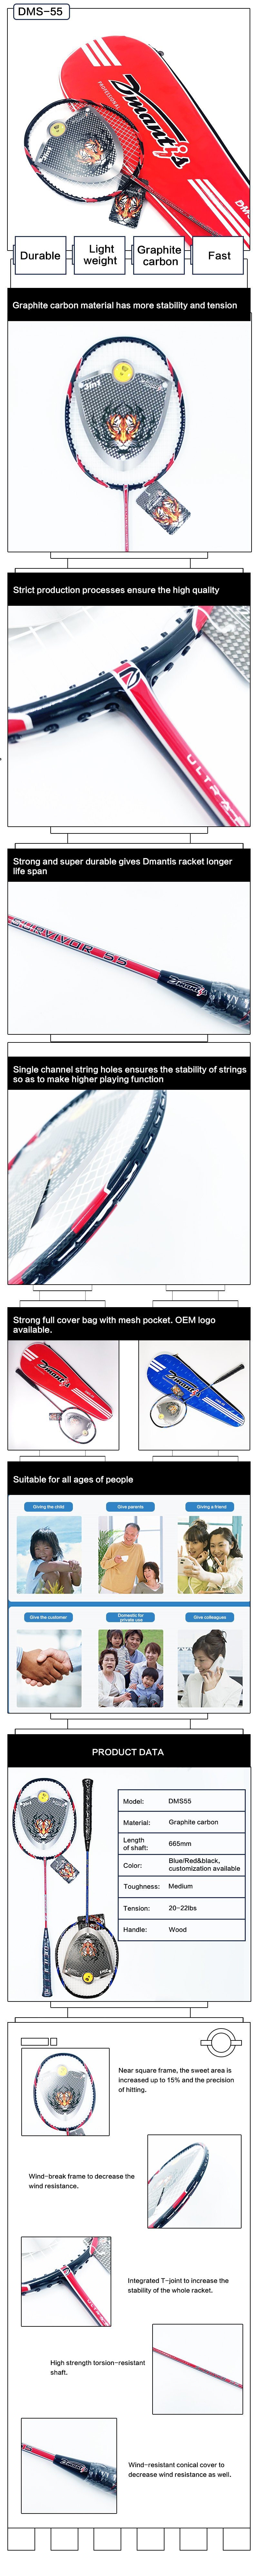 Wholesale Customized High Quality Badminton Racket with String and Cover Bag